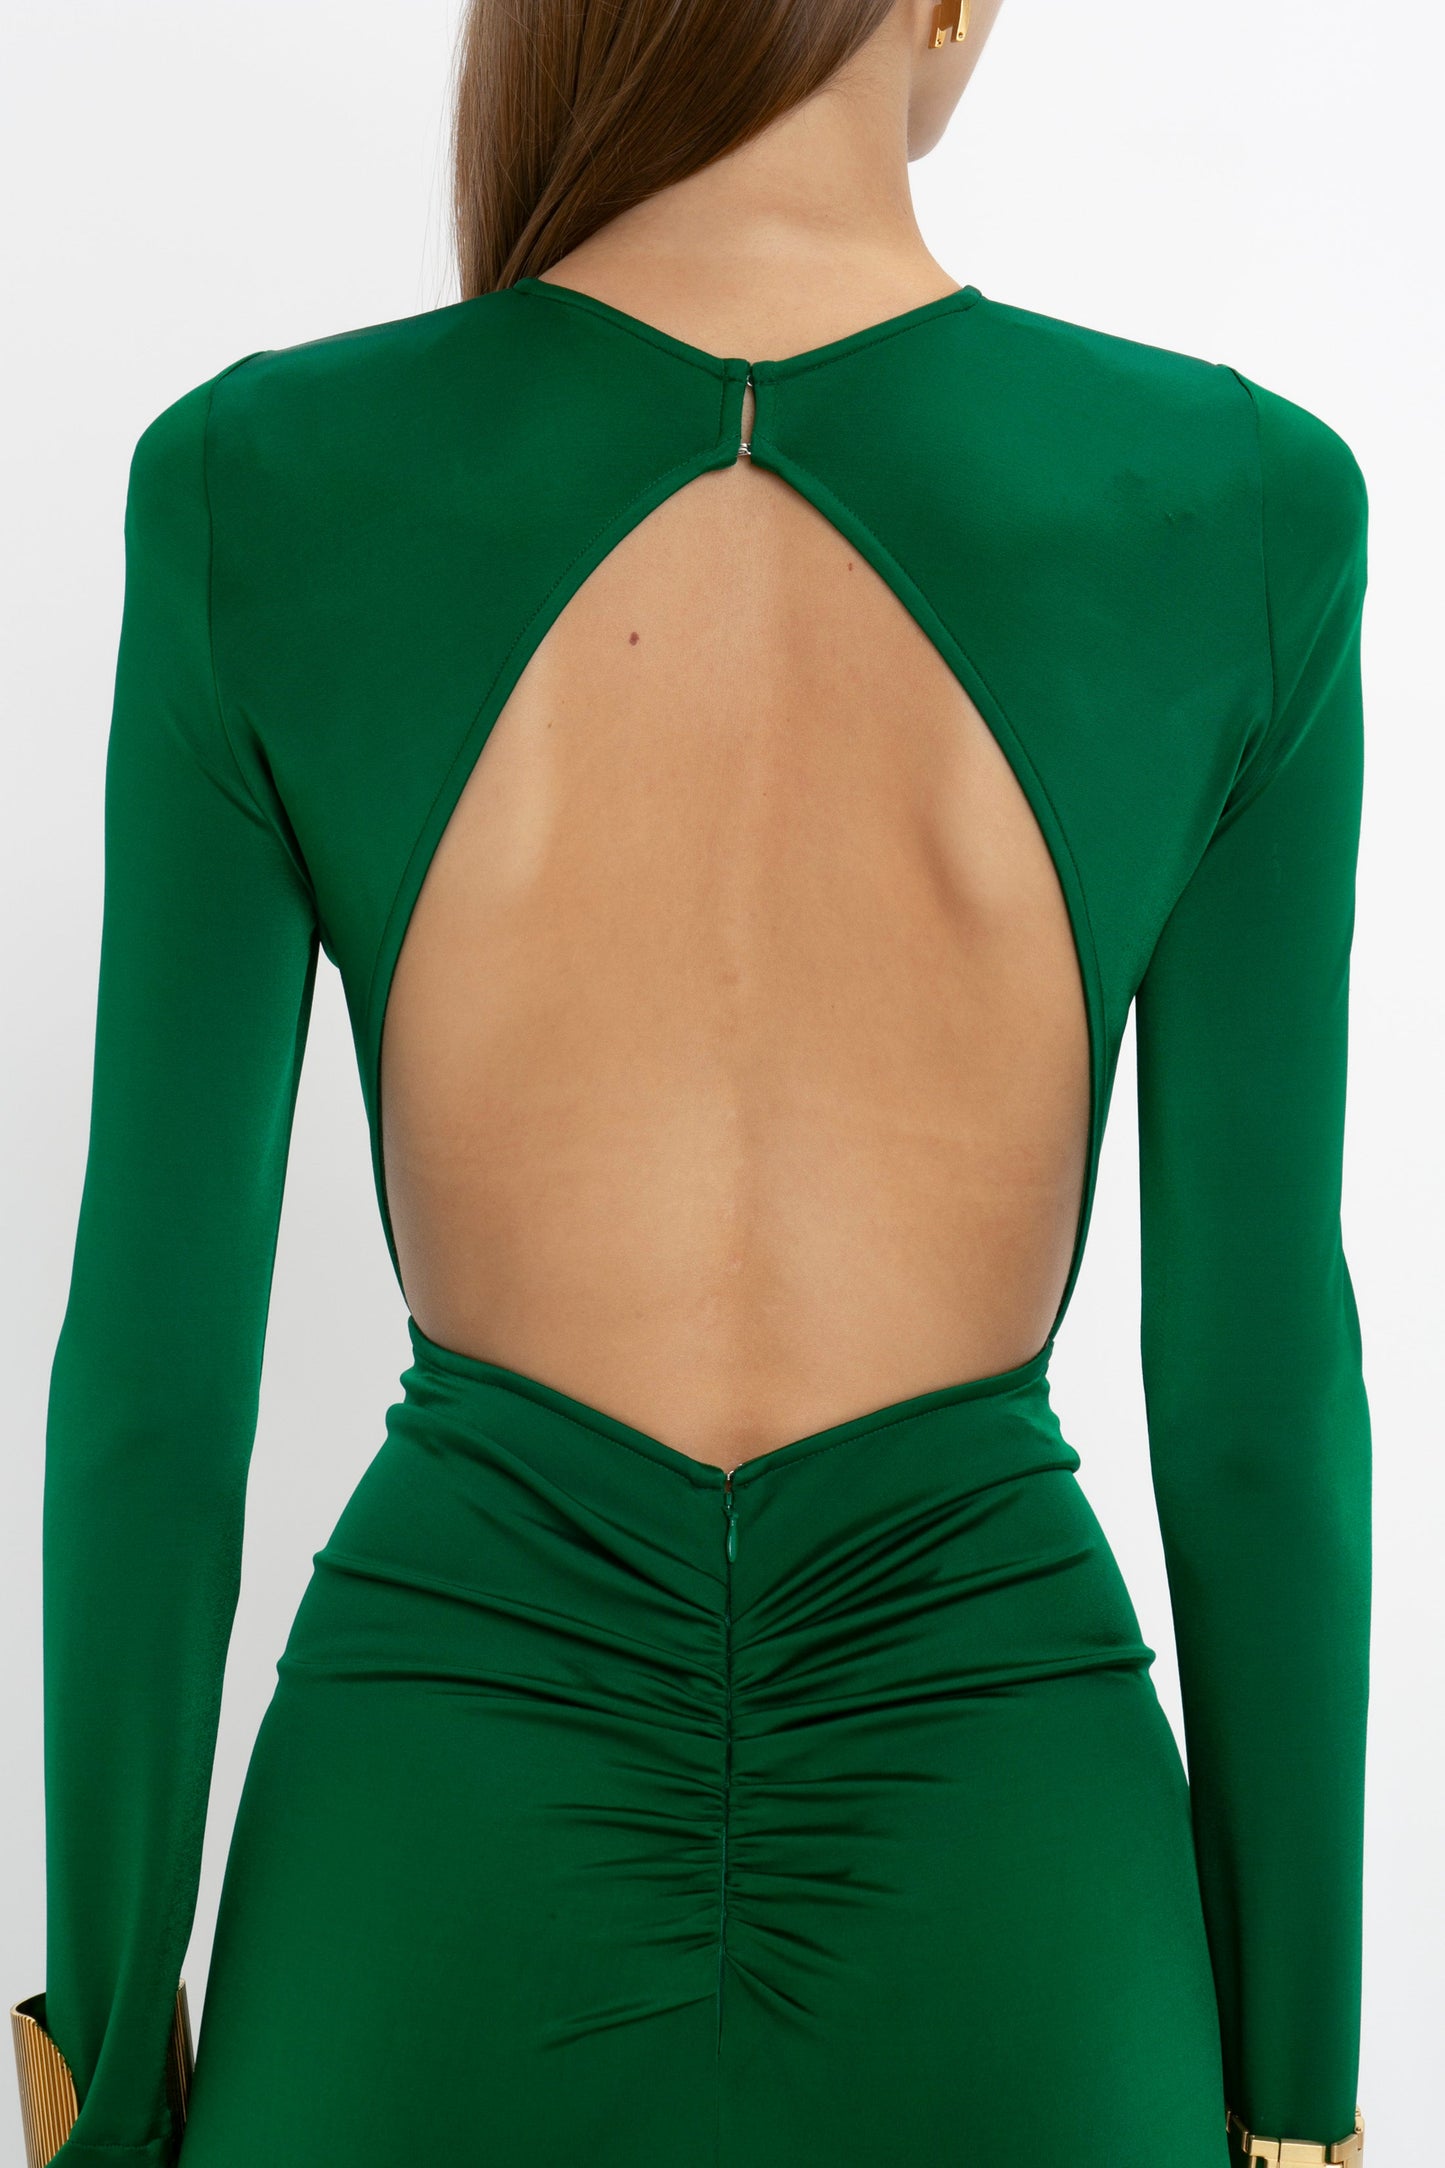 A person wearing the Victoria Beckham Circle Detail Open Back Gown In Emerald with long sleeves, ruched detailing at the lower back, and a longer-length hem is shown from behind.